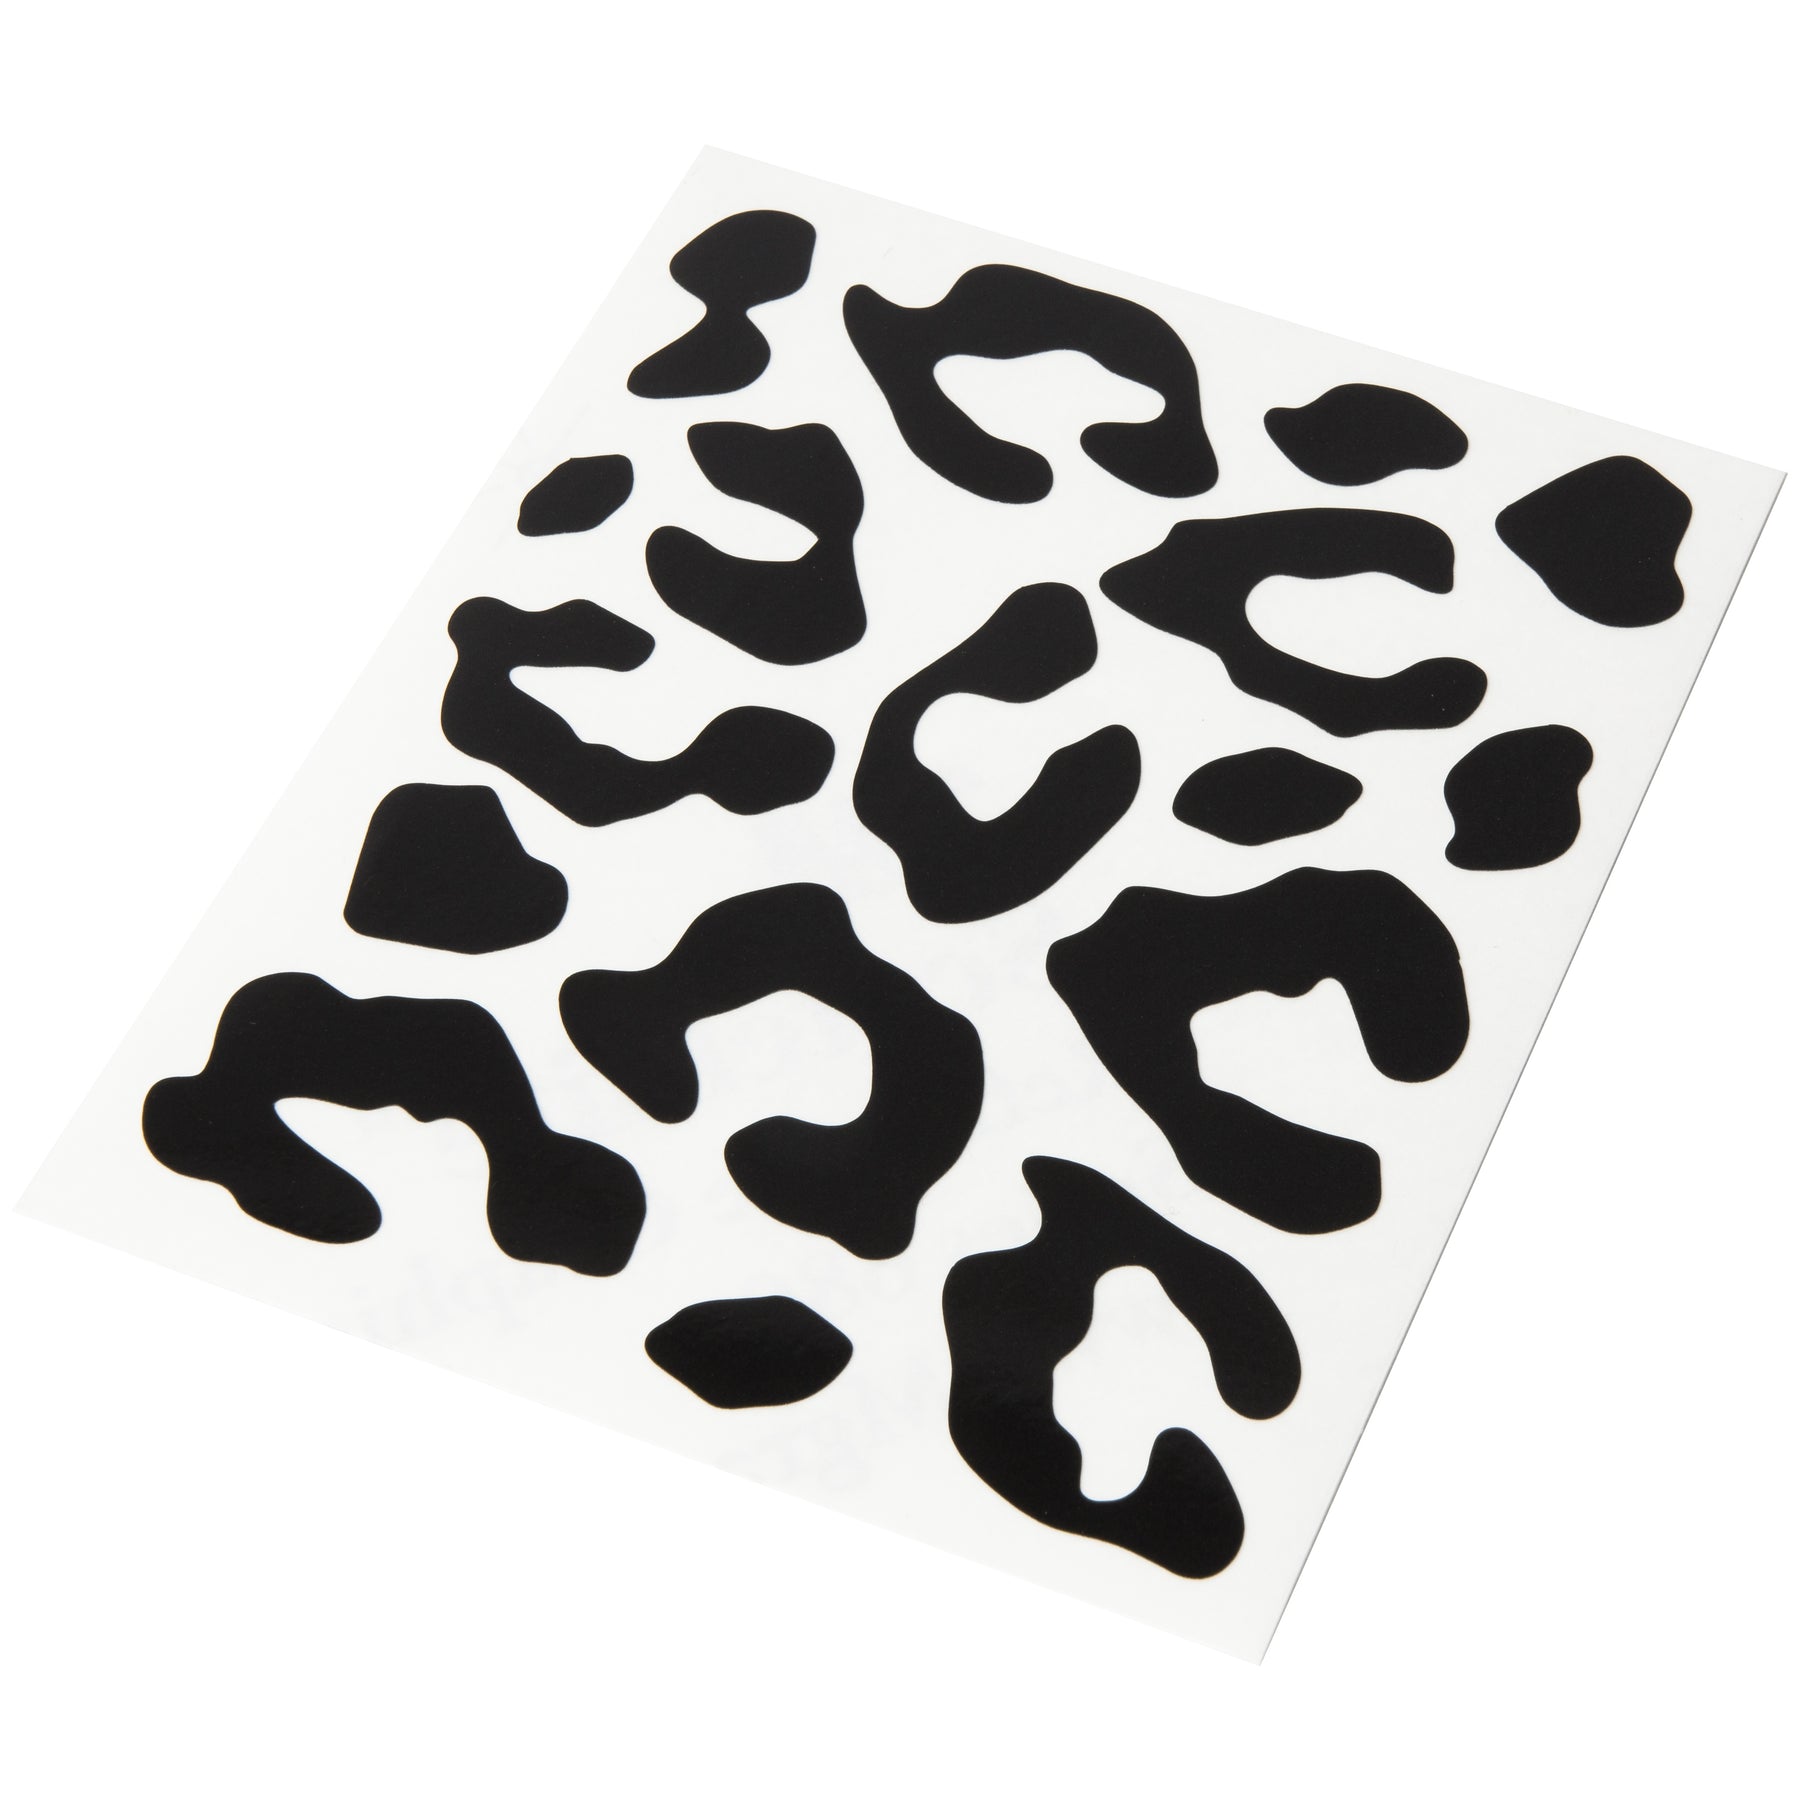 Bookman Reflective Leopard Print Stickers in Black to customize